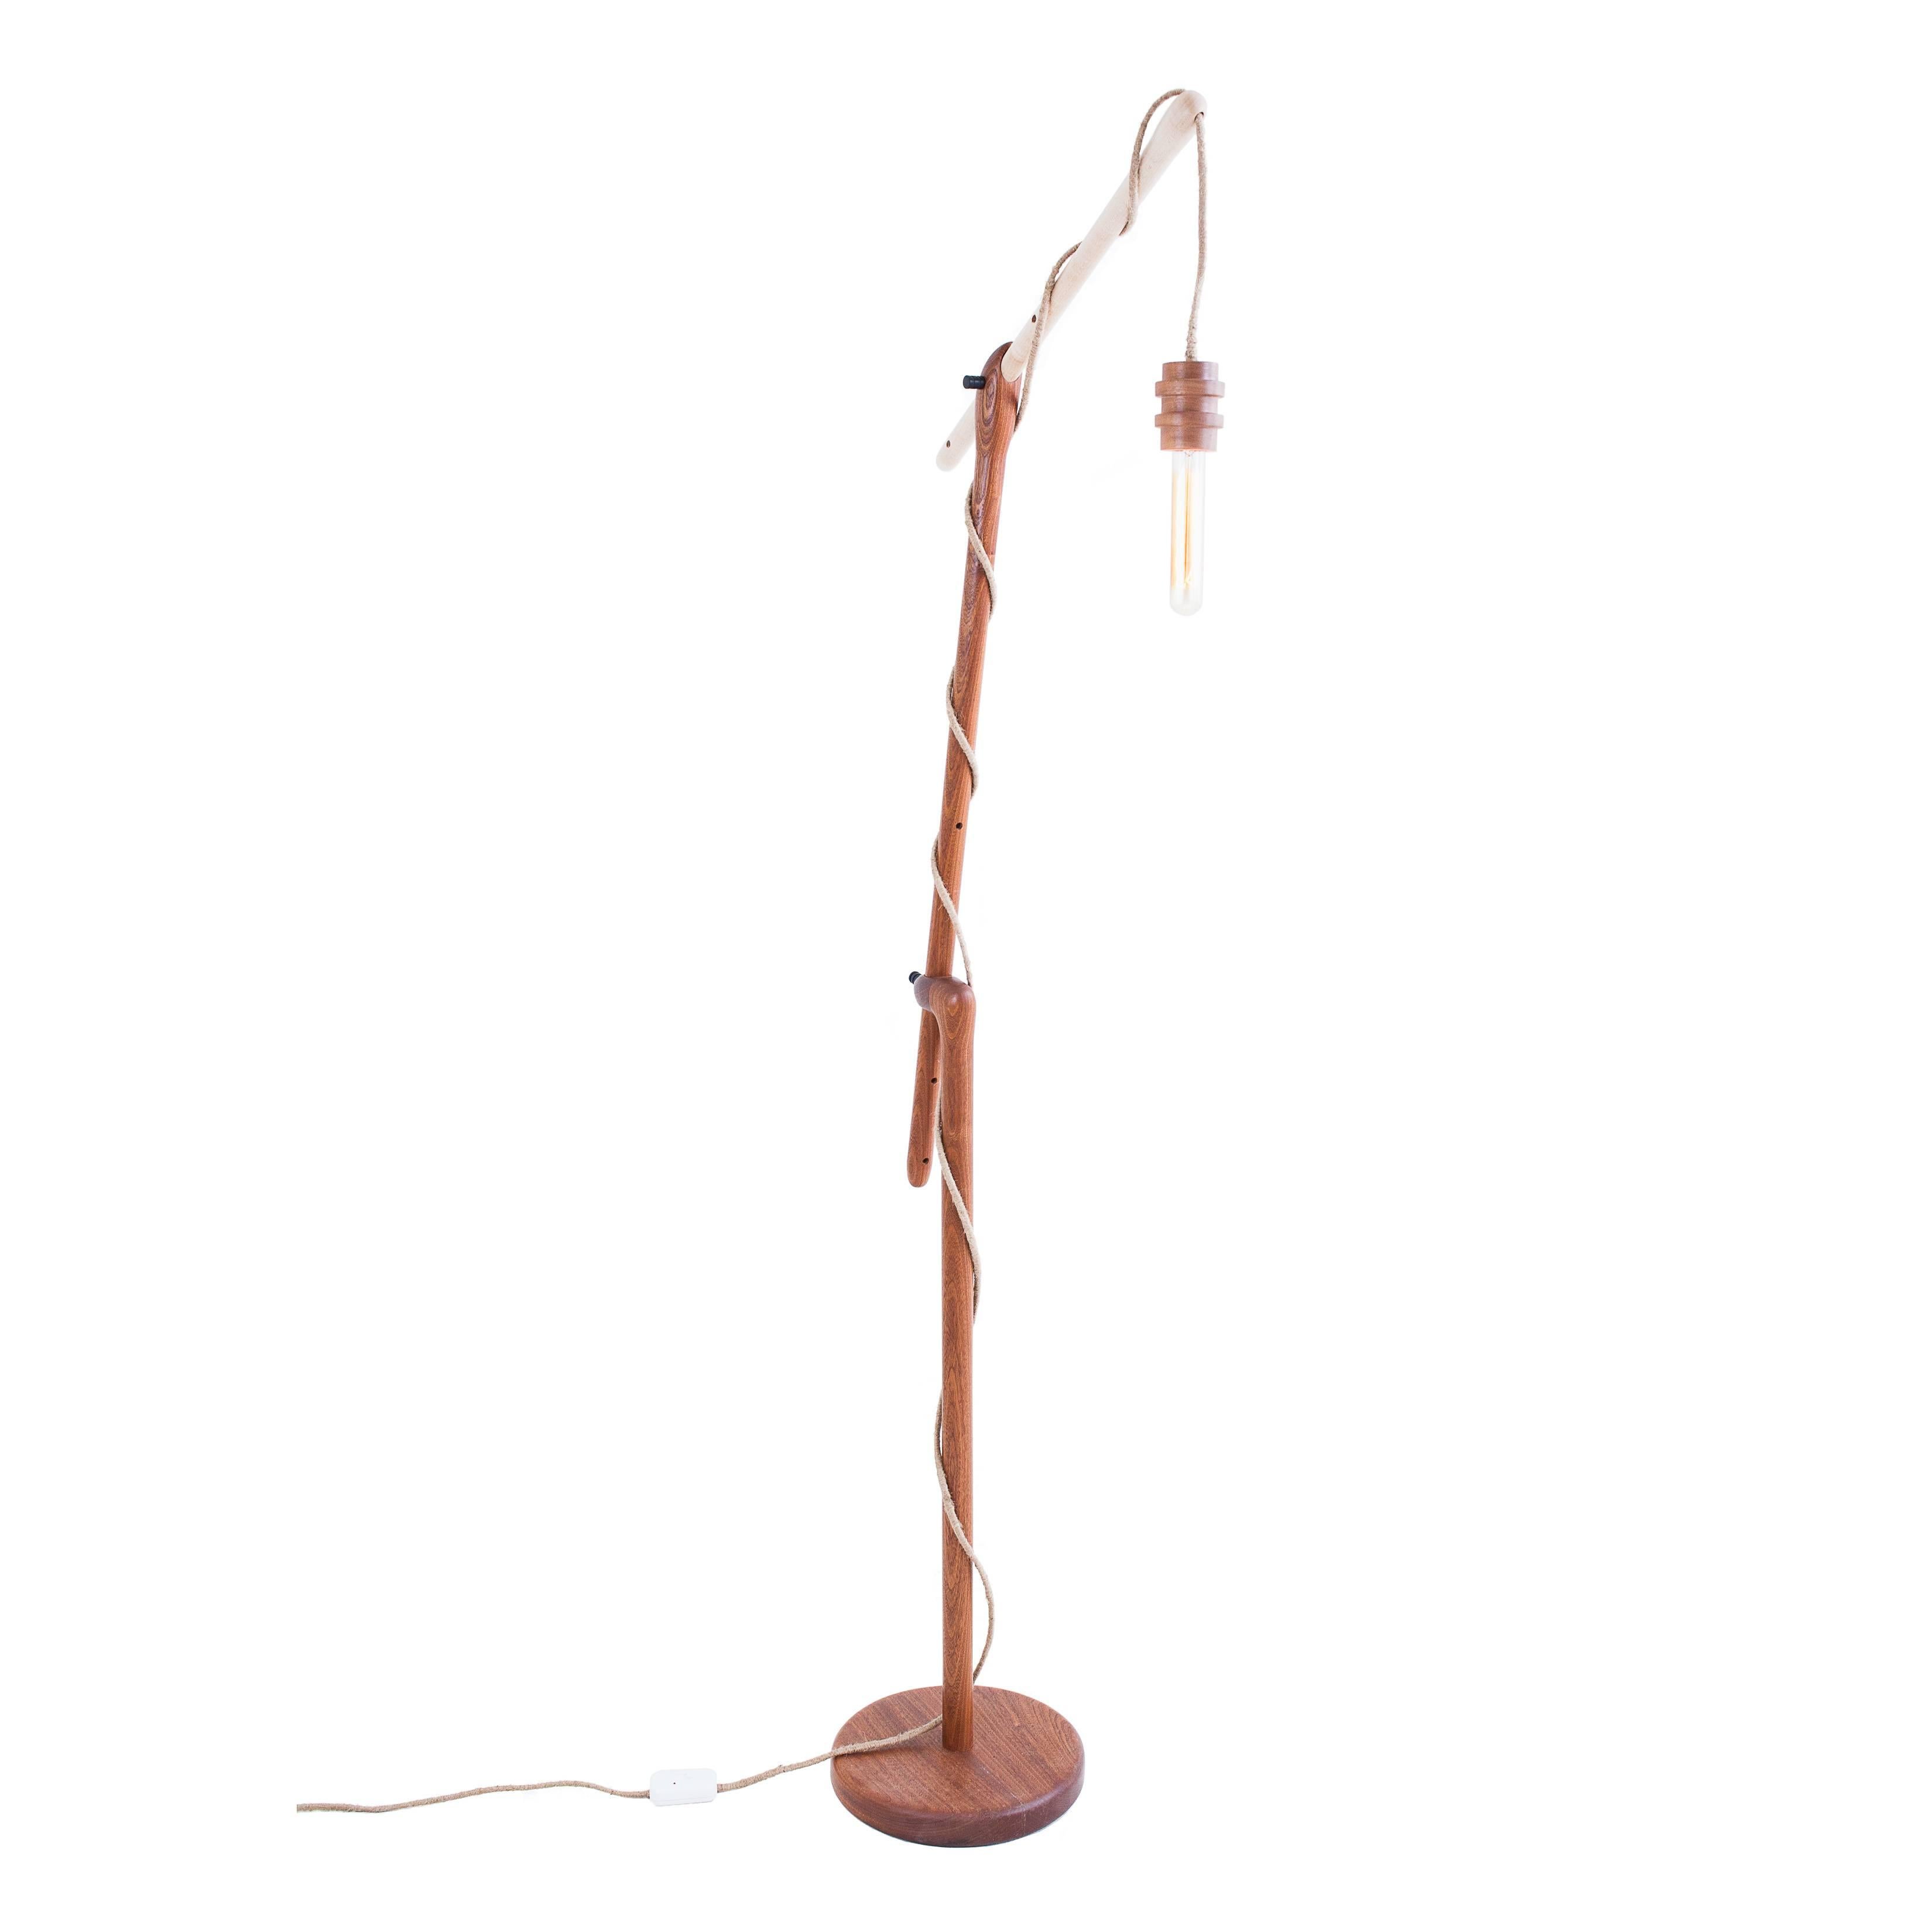 The Reading light is an adjustable floor lamp with an all wood system. Hand-turned ebony pins allow the reader to adjust the arms to the desired angle and height. The solid hanging pendant light has a hand-turned housing, and features hand-wrapped